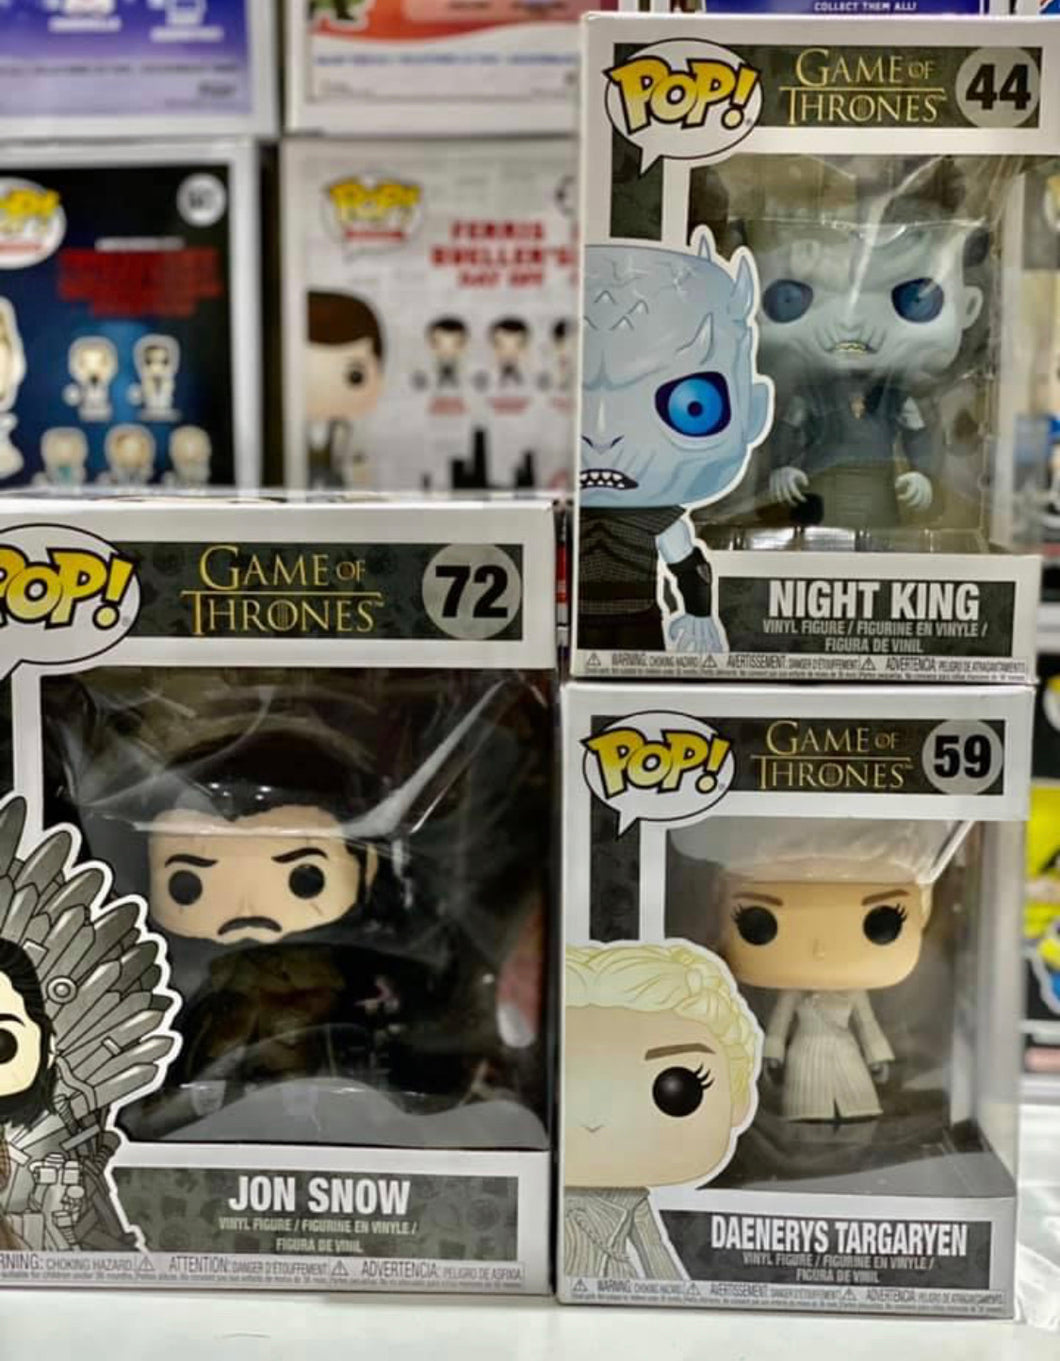 X 3 Game of Thrones POPS! (Box Damage) Auction (Reserved for Auction Winner)